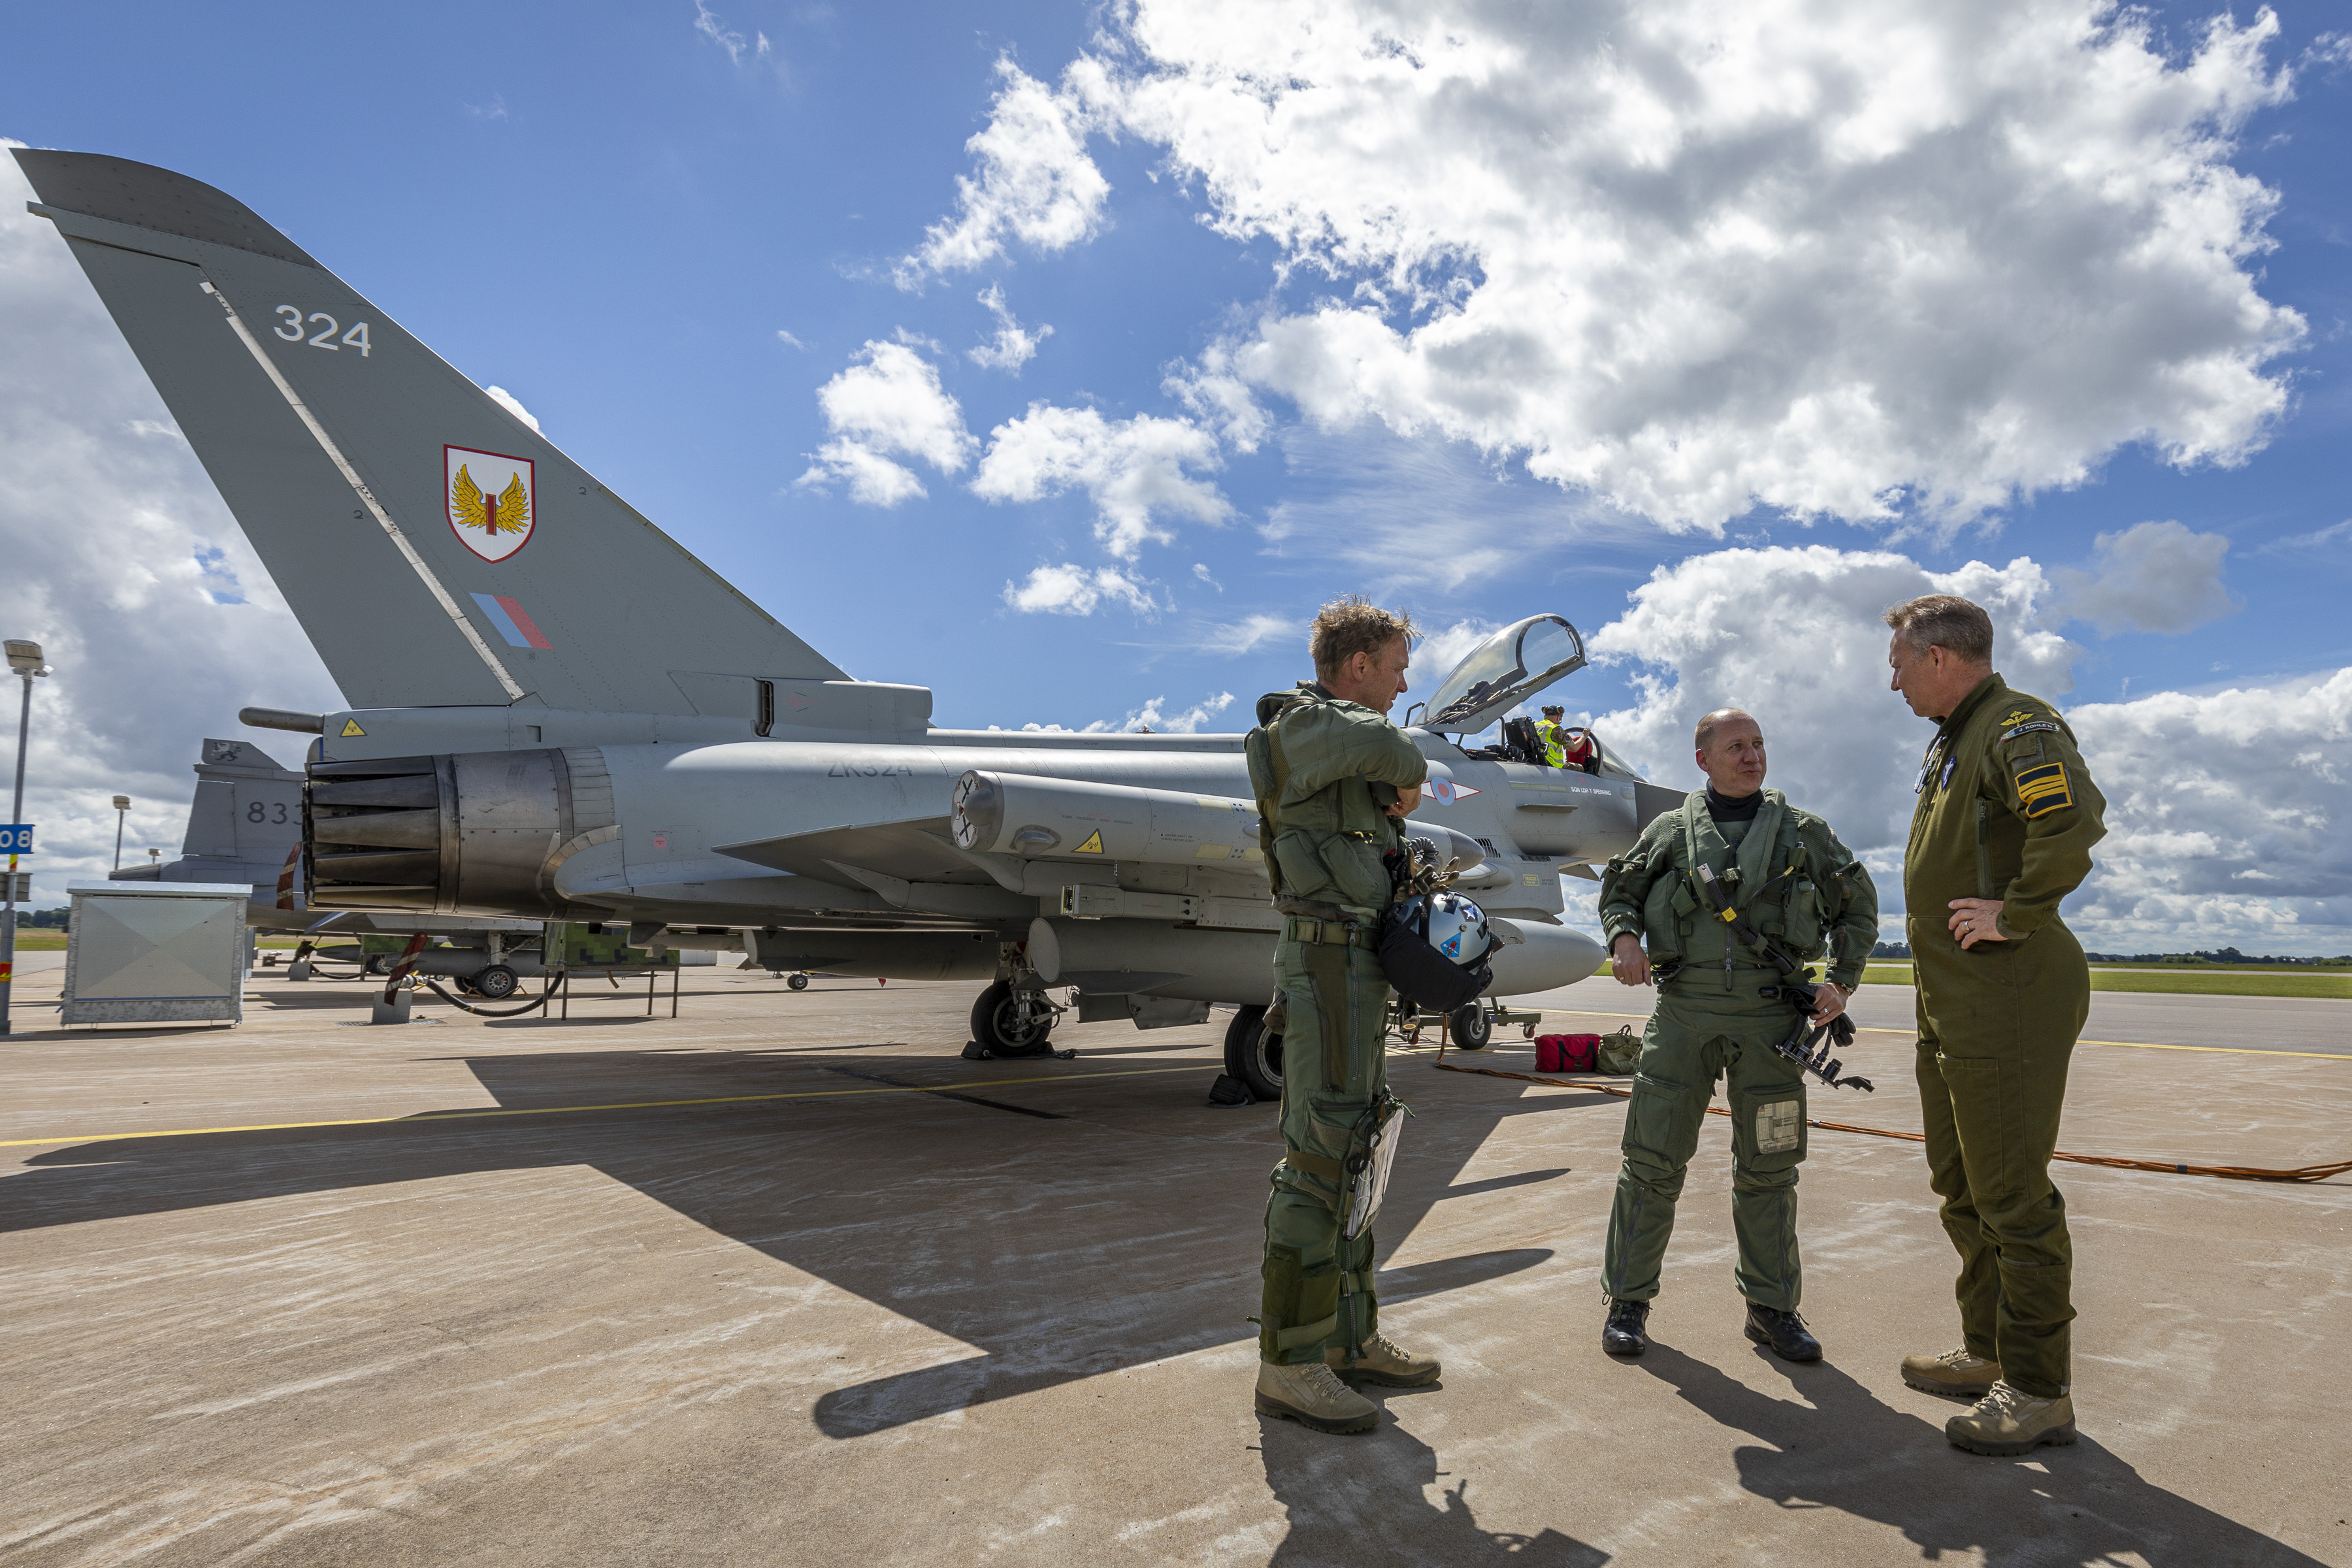 Image shows RAF aviators standing in discussion by Typhoon aircraft.